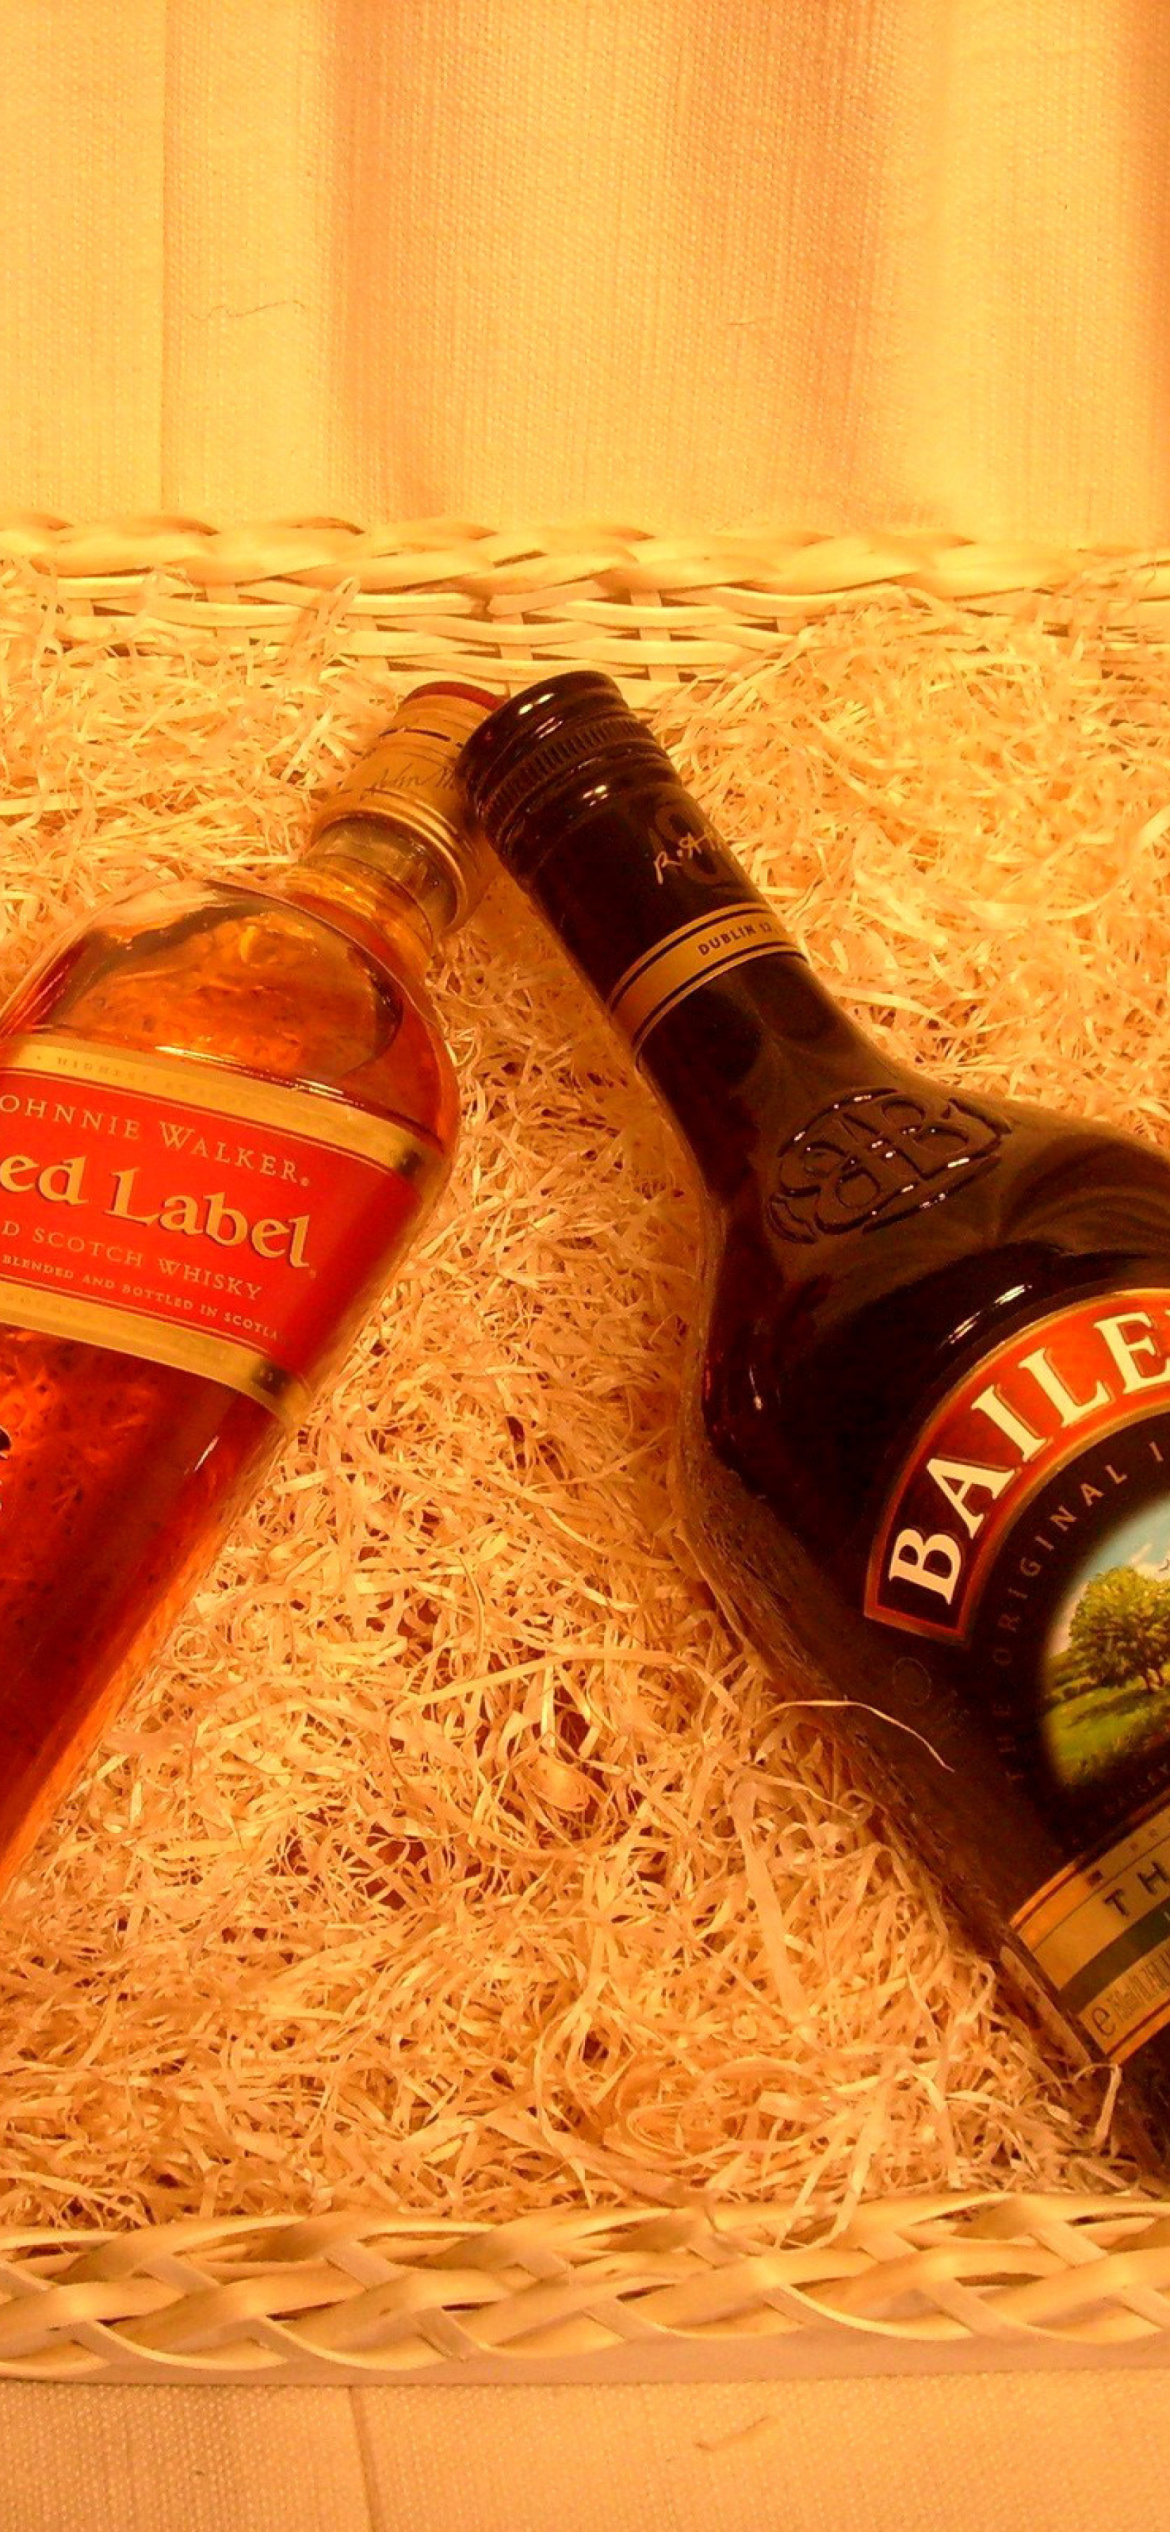 Baileys and Red Label screenshot #1 1170x2532